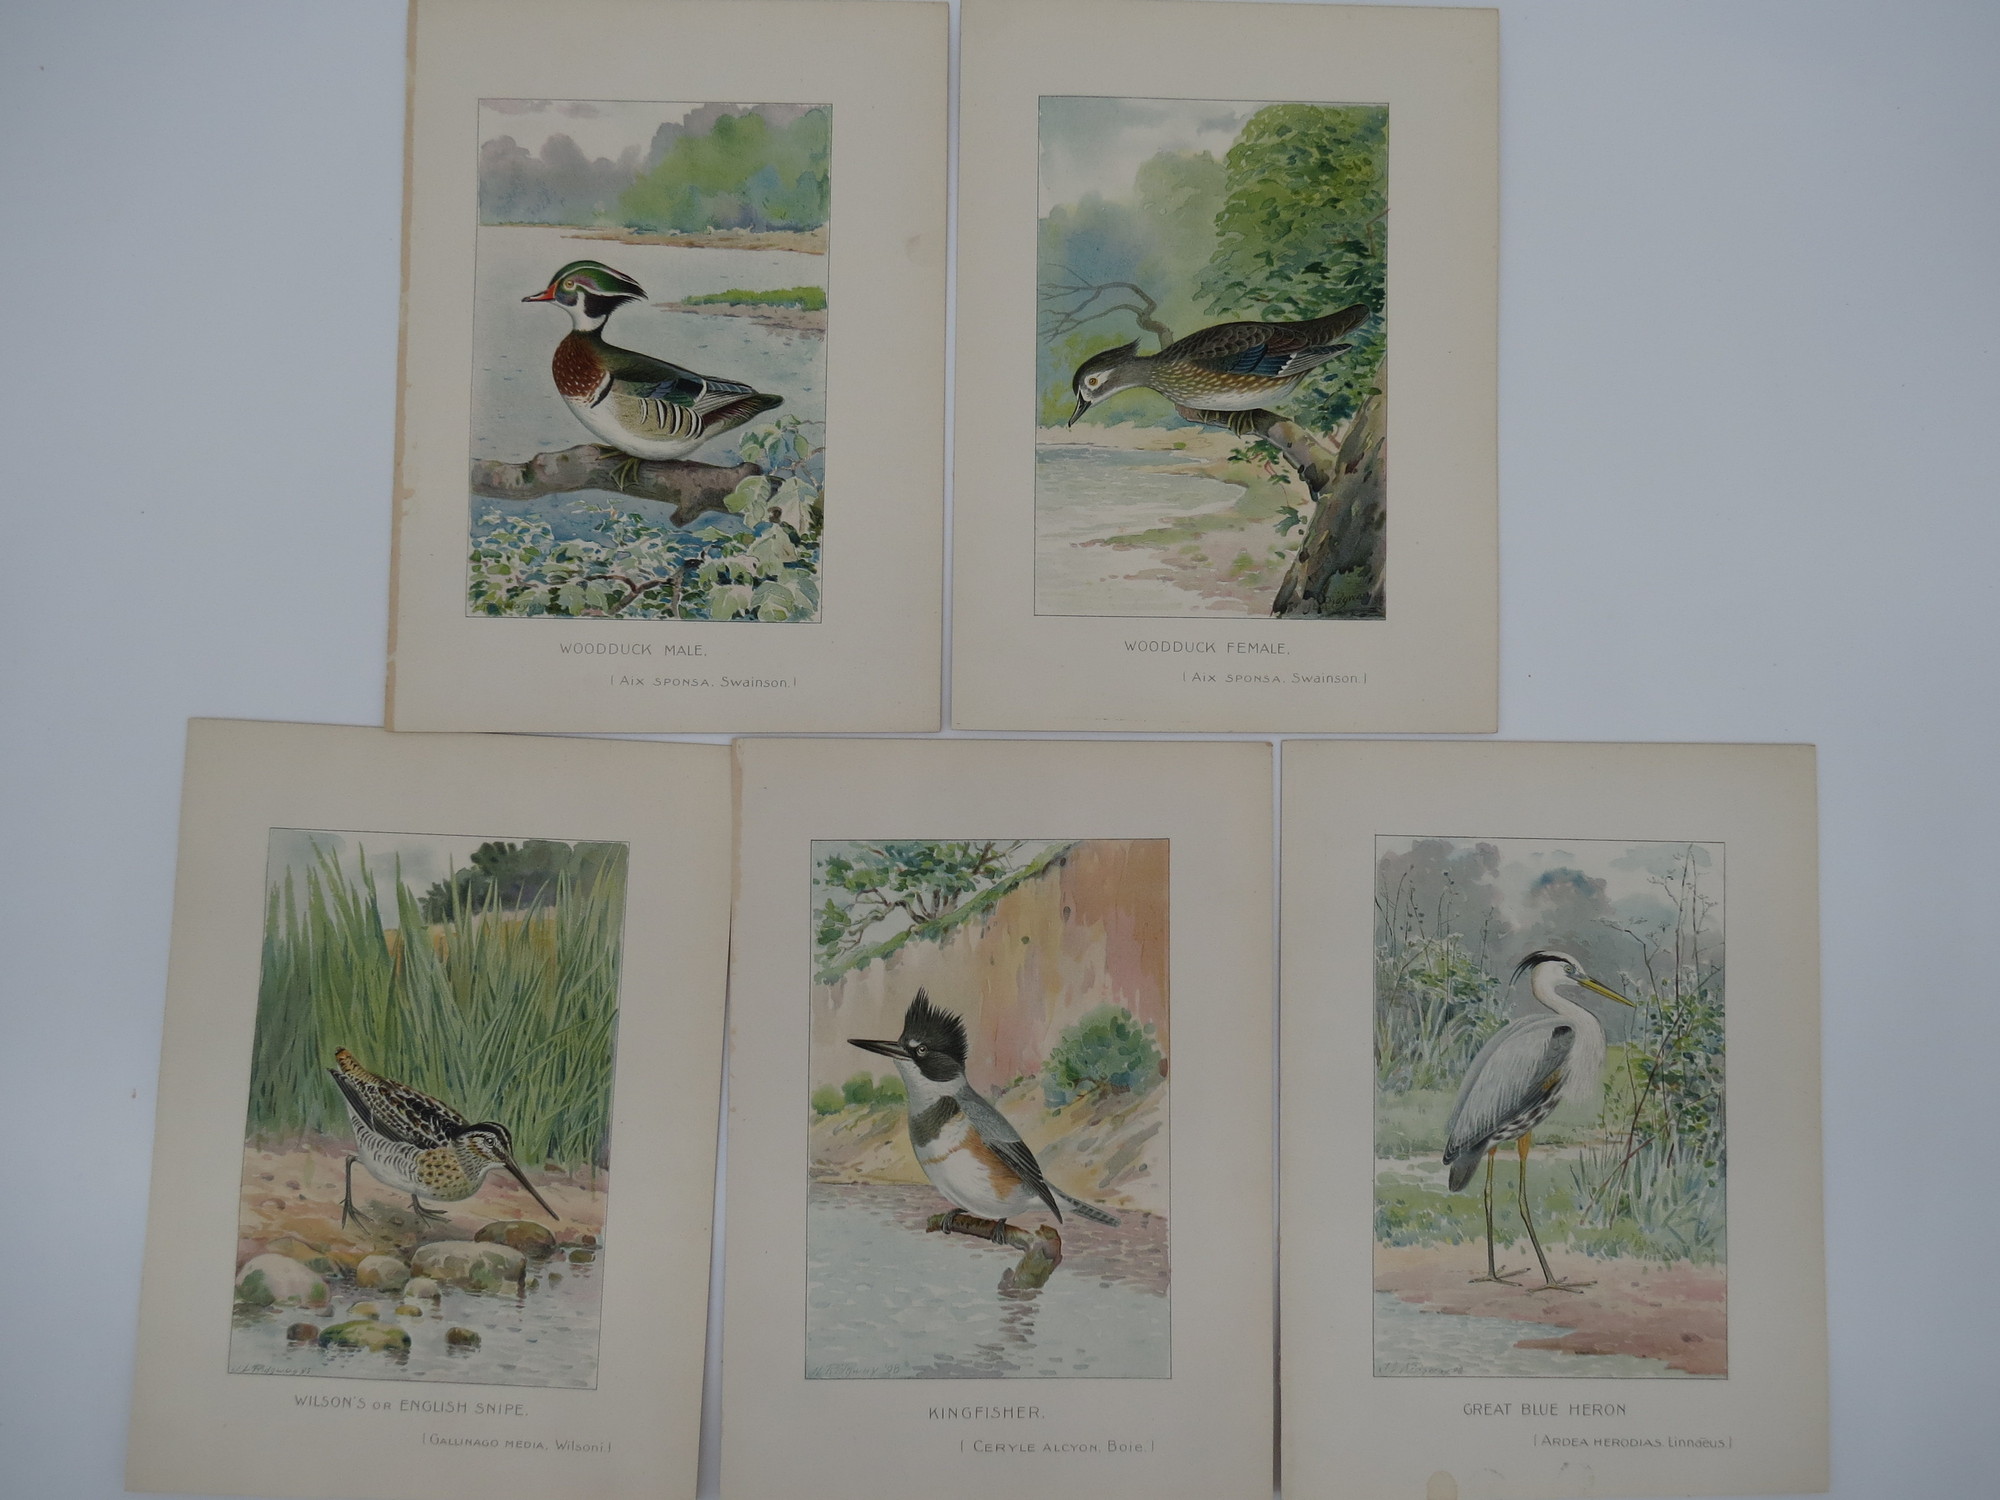 Image for 5 BIRD & DUCK CHROMOLITHOGRAPHIC PLATES BY J. L. RIDGWAY Great Blue Heron; Kingfisher; Wilson's or English Snipe; Woodduck Male; Woodduck Female